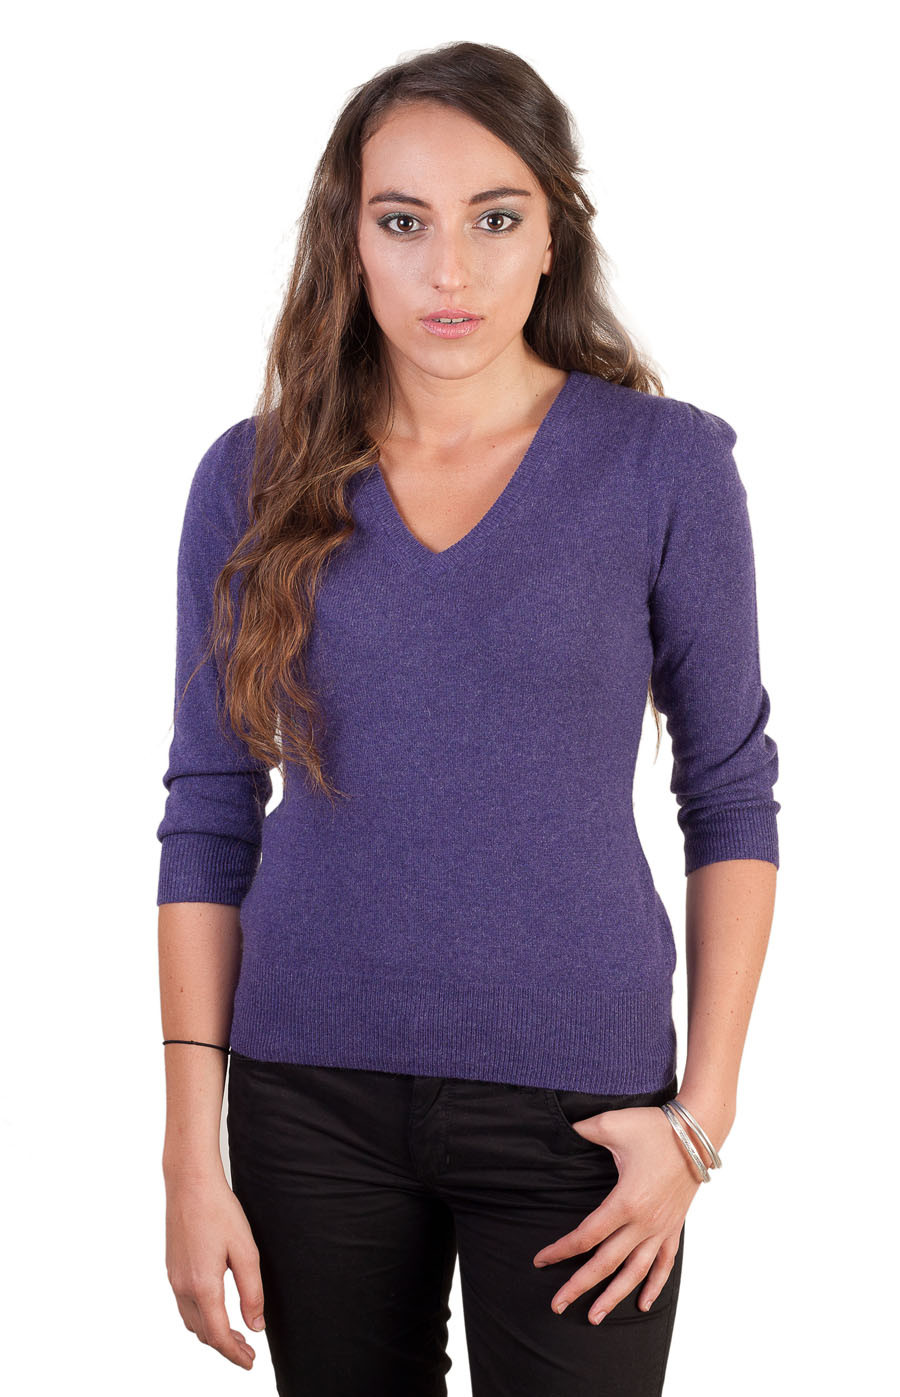 Le pull cachemire femme ultra chic !